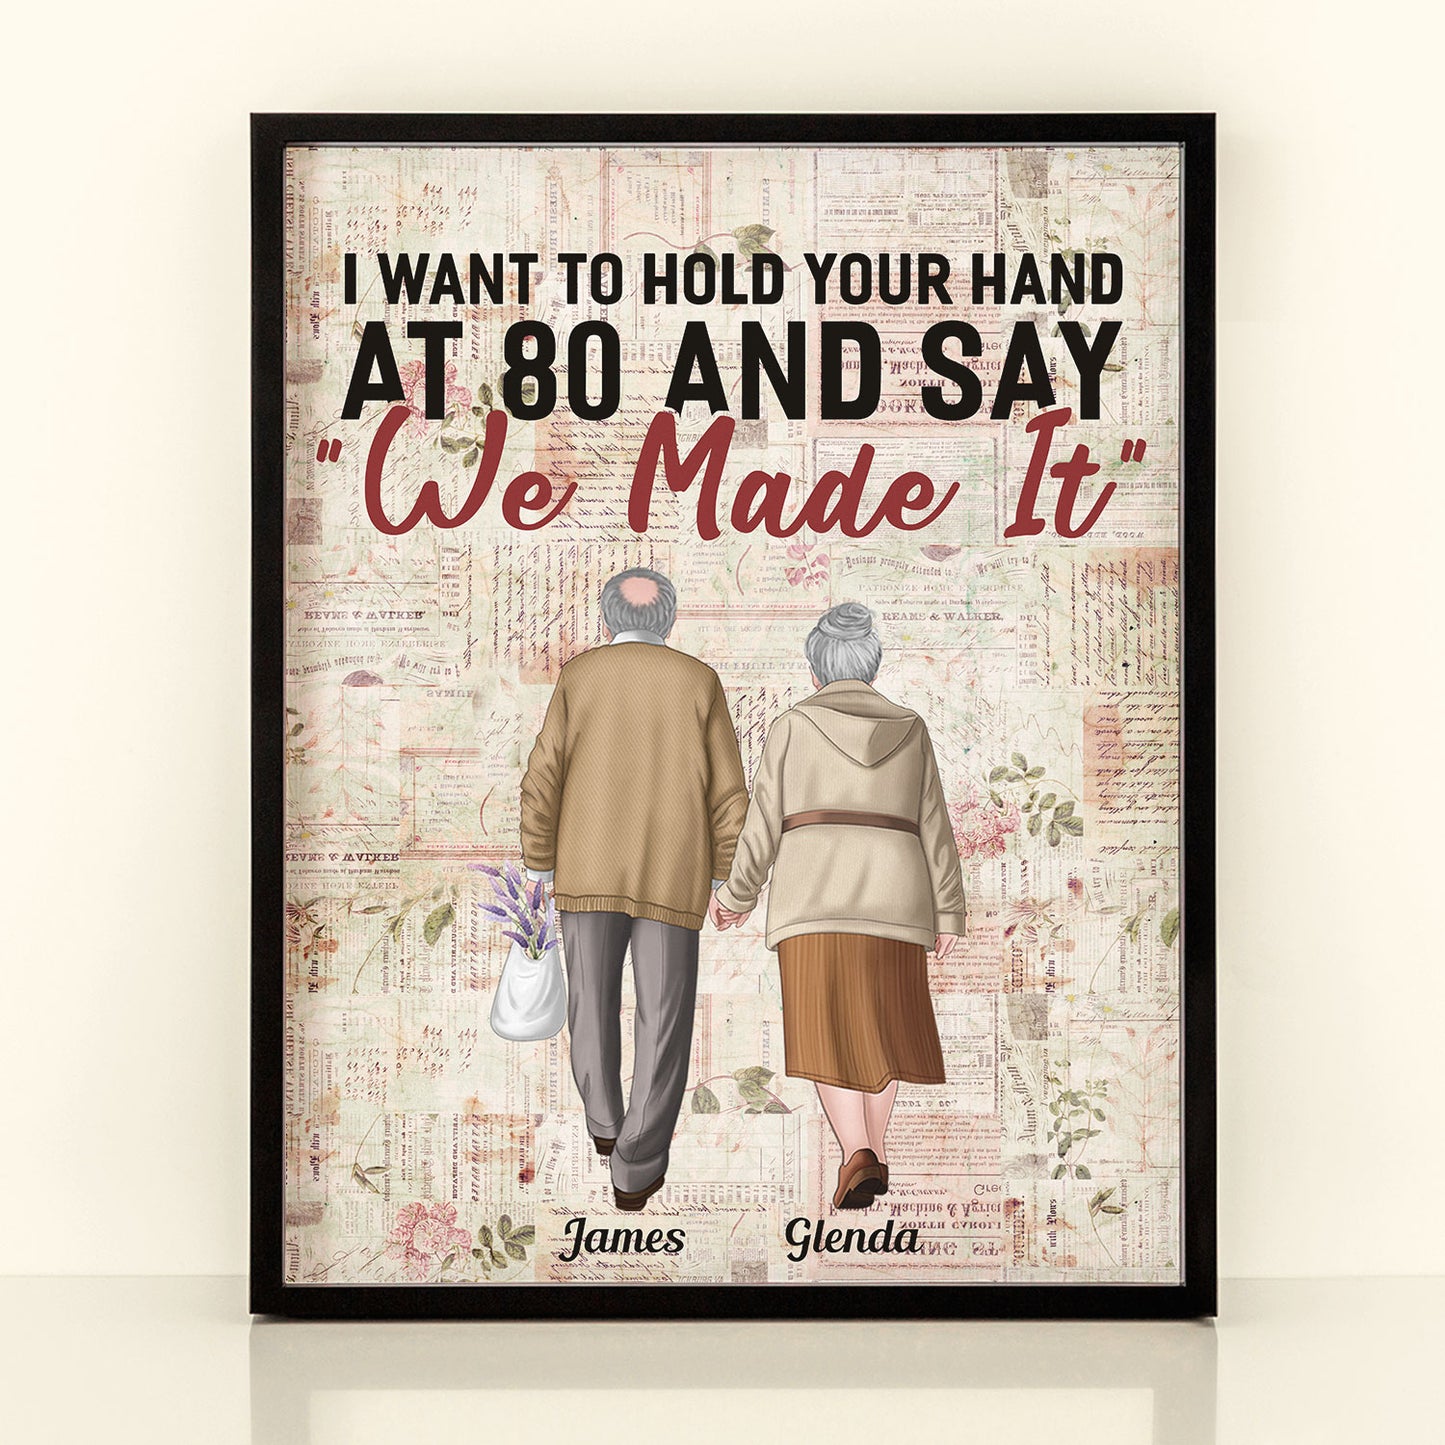 I Want To Hold Your Hand At 80 - Personalized Poster - Anniversary, Valentine's Day Gift For Husband, Wife